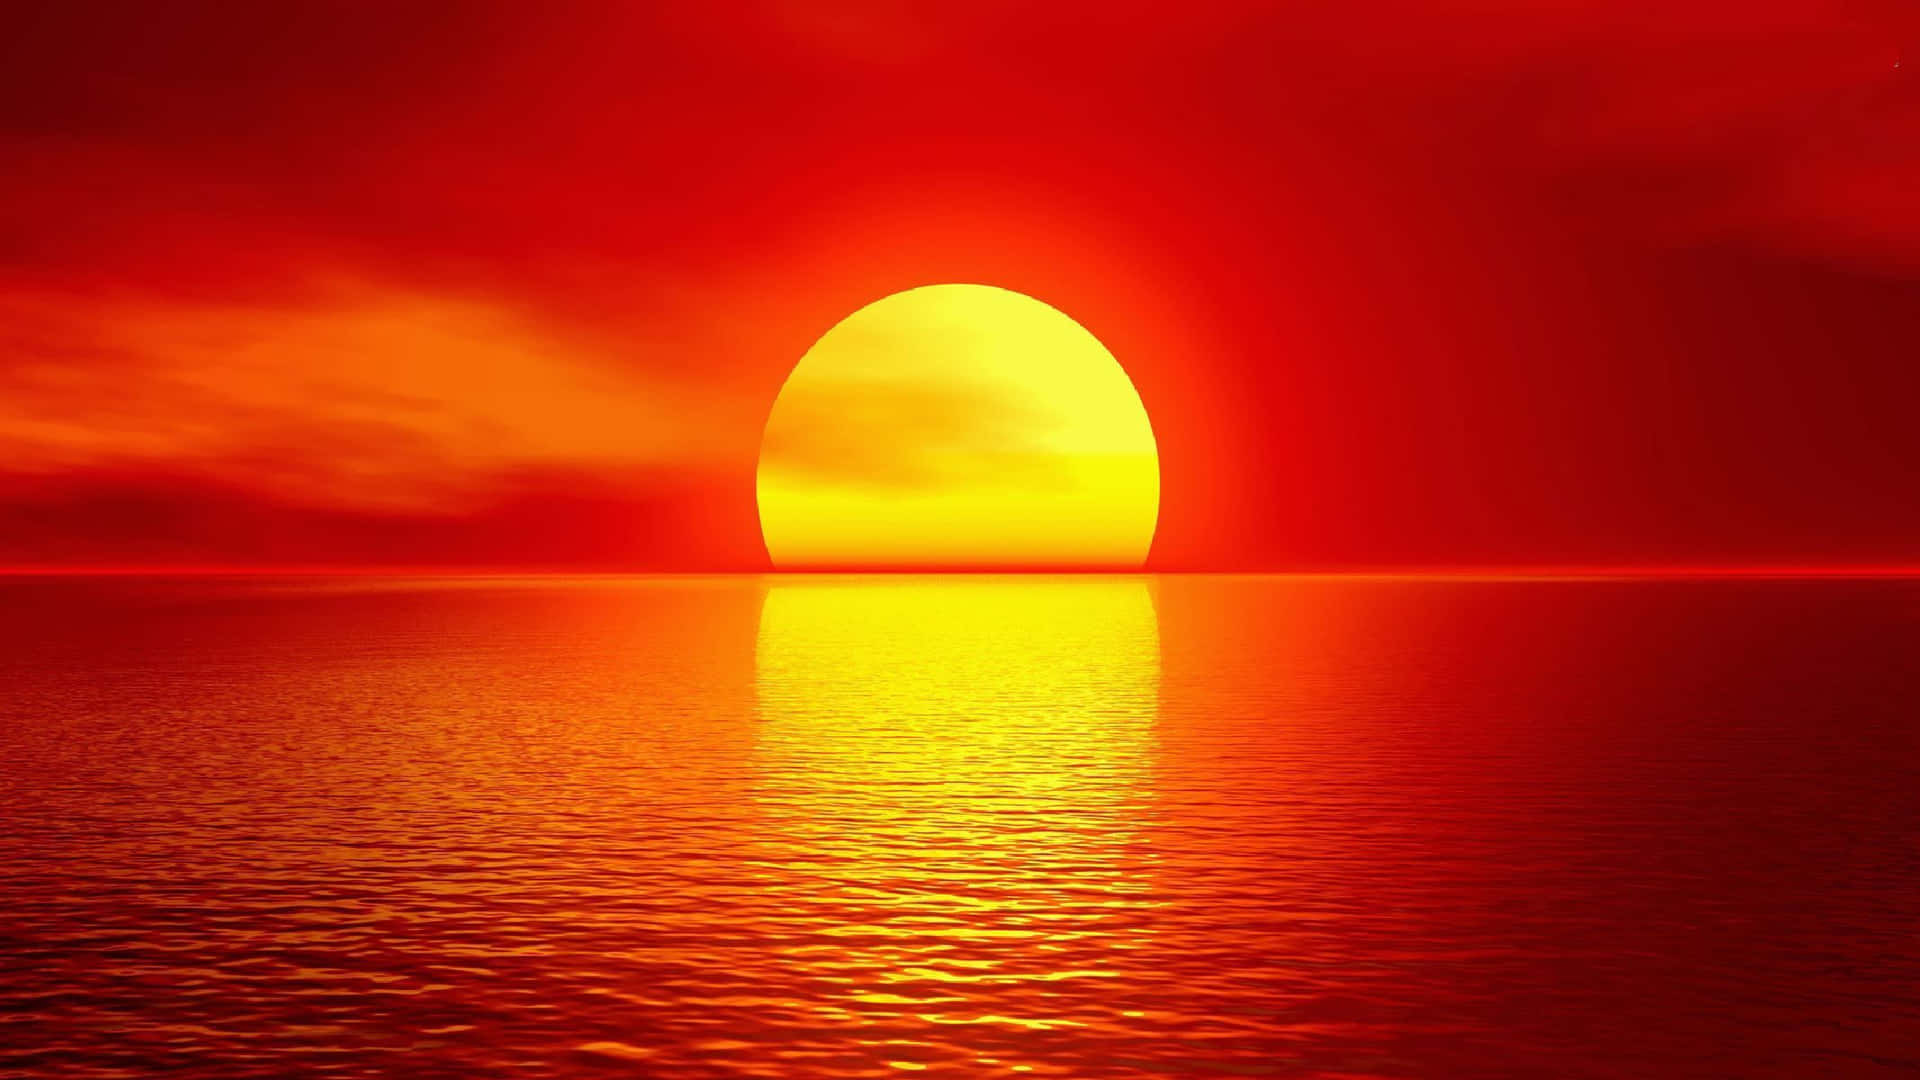 Mesmerizing Red Sunset Over the Calm Lake Wallpaper